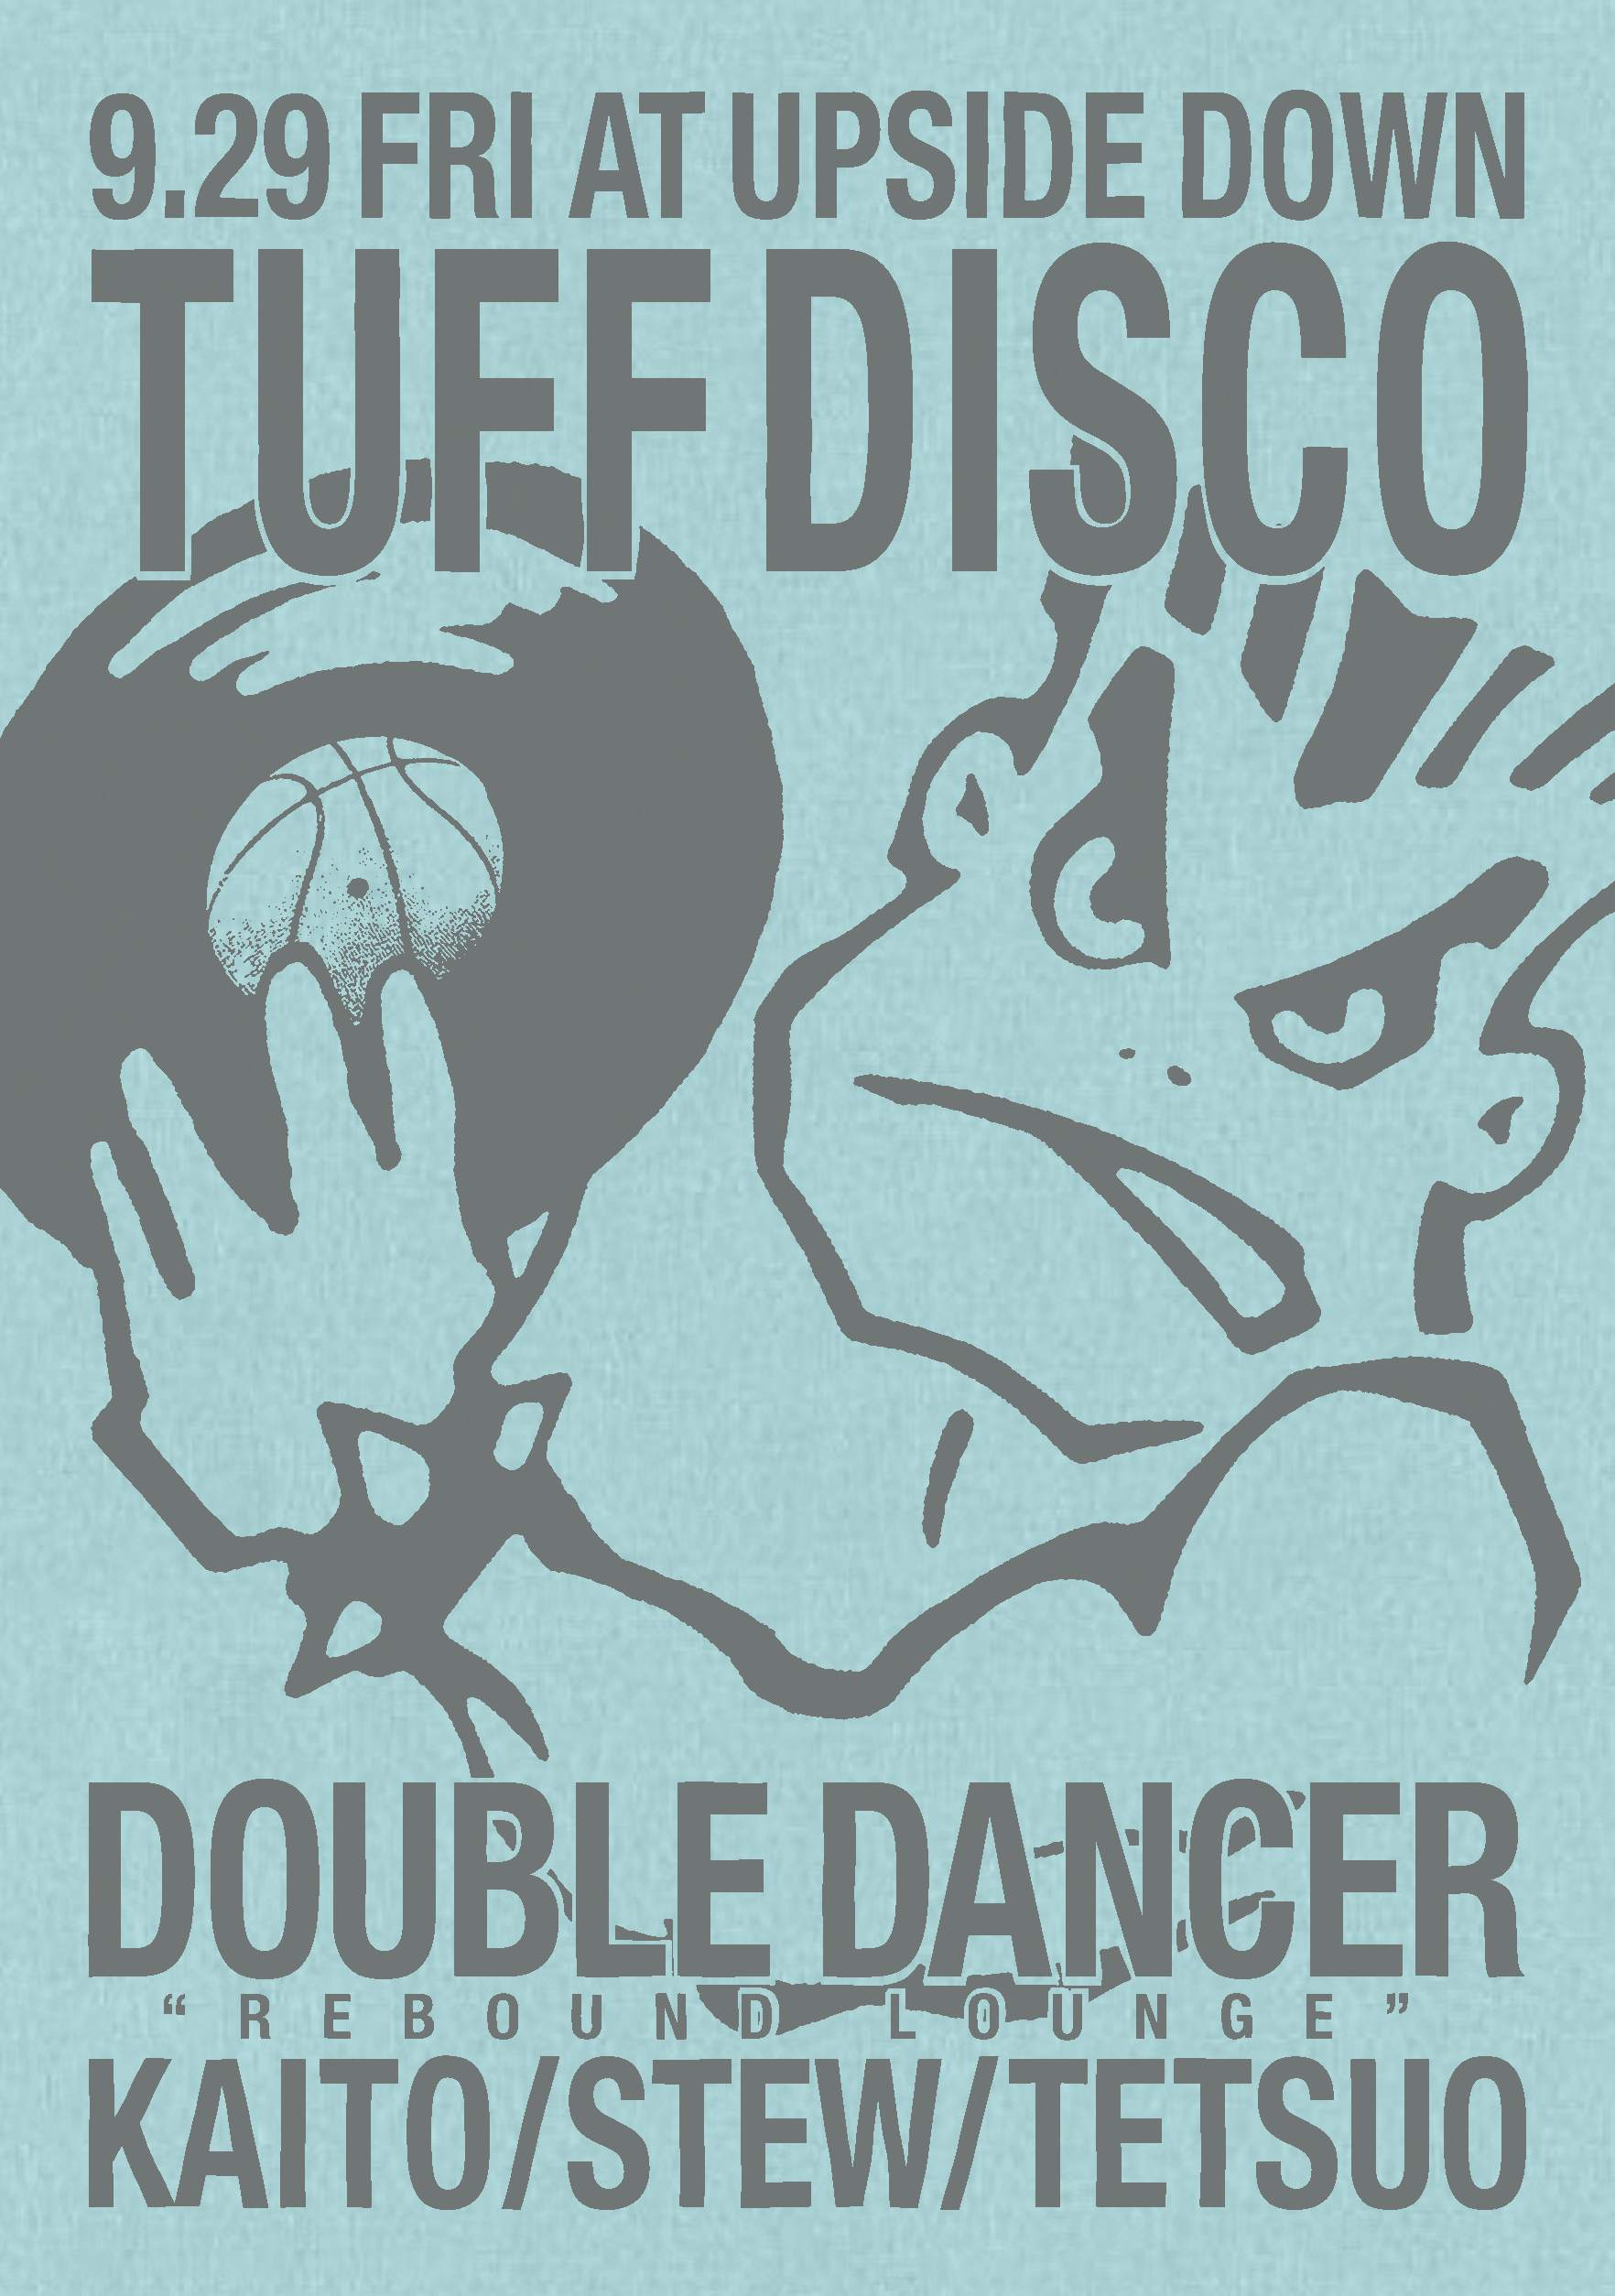 Tuff Disco with Double Dancer - Página frontal